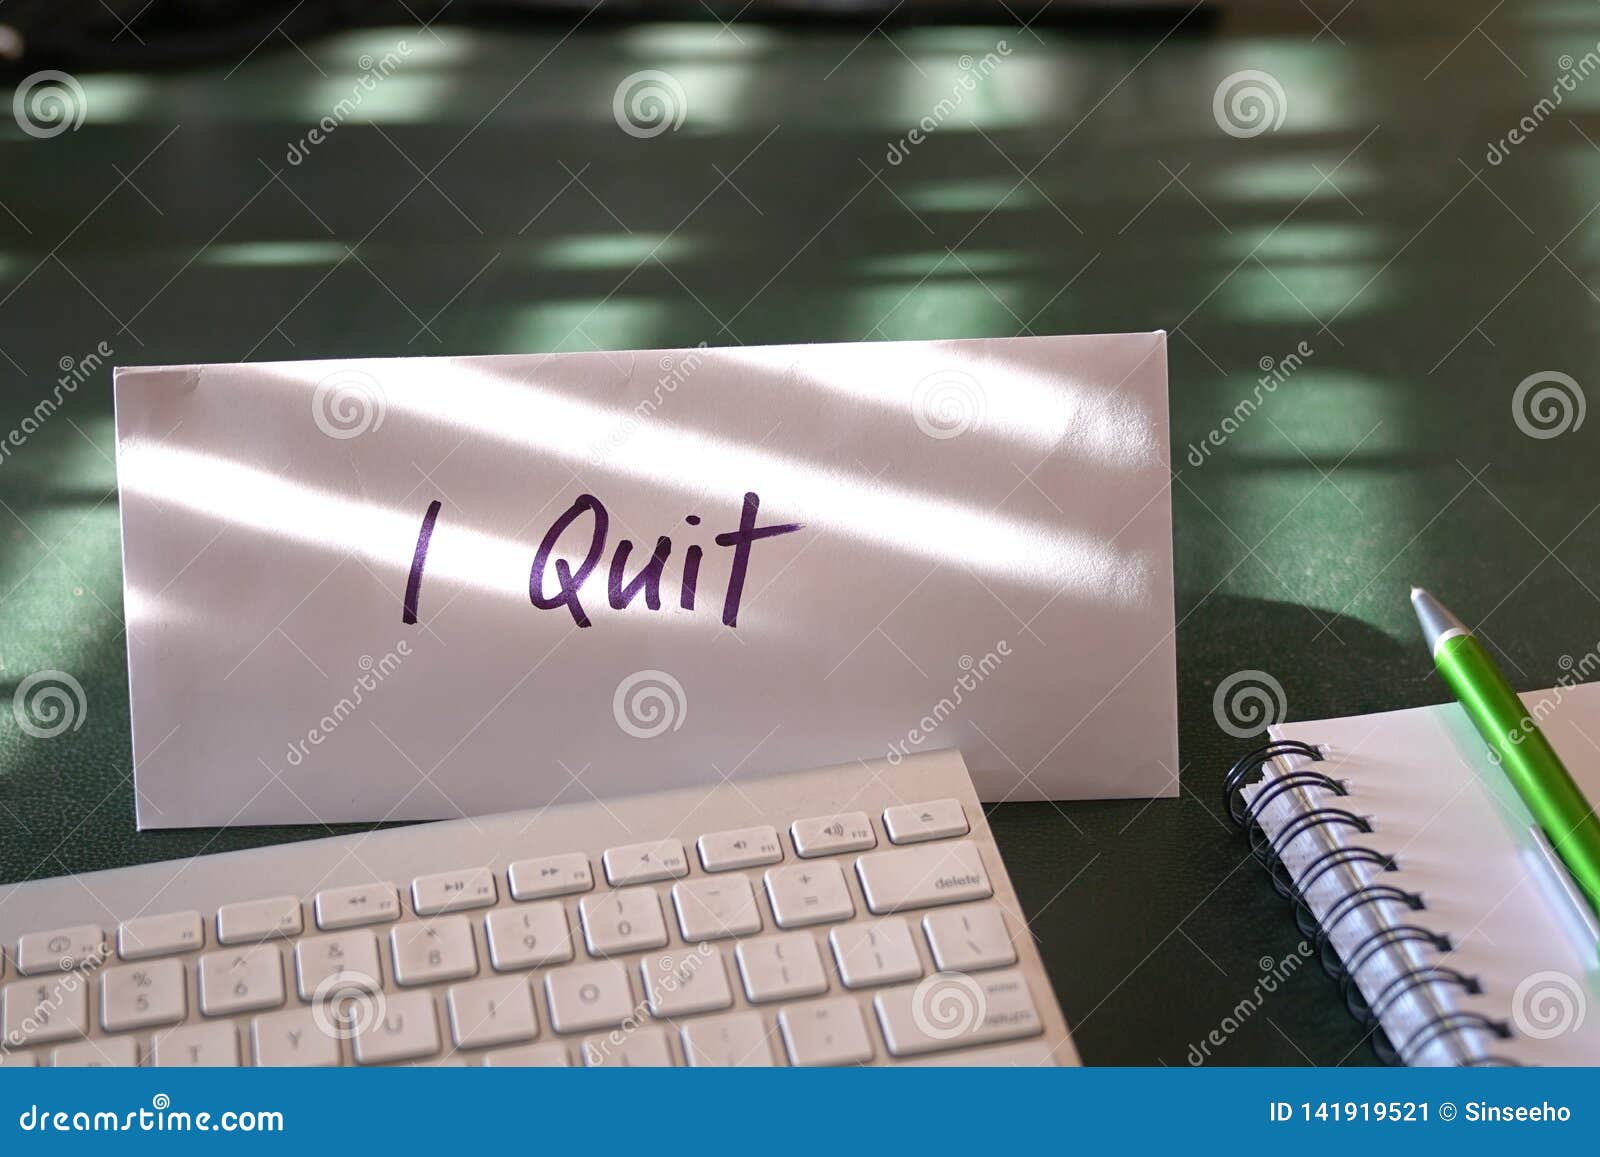 Resignation Letter With Words I Quit On The Envelope Stock Image Image Of Hand Executive 141919521